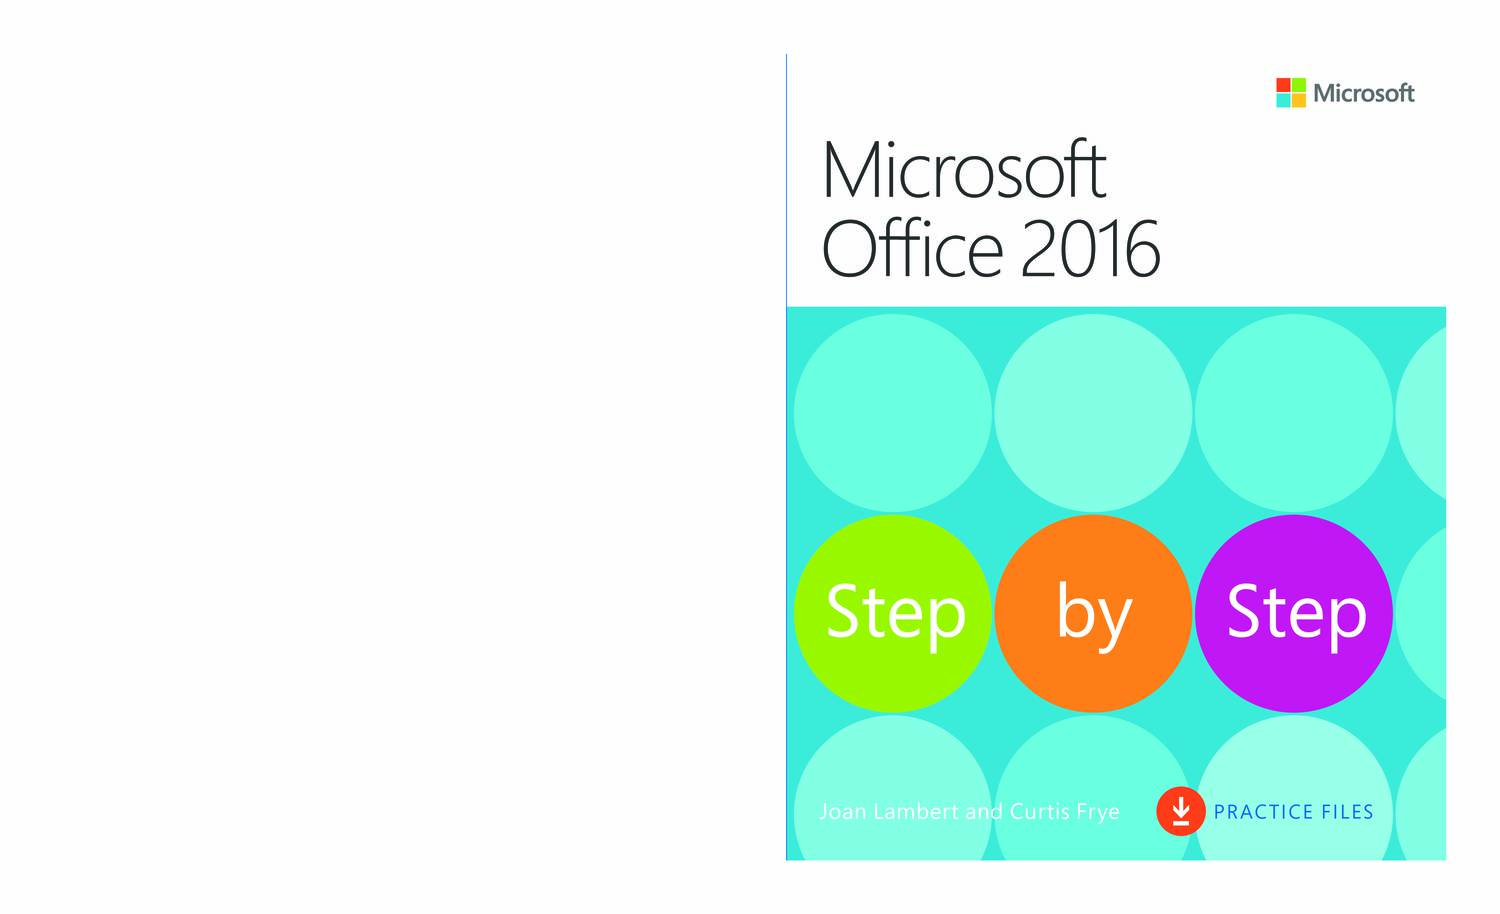 Microsoft office 2016 step by step pdf free download how to download microsoft photos in windows 10